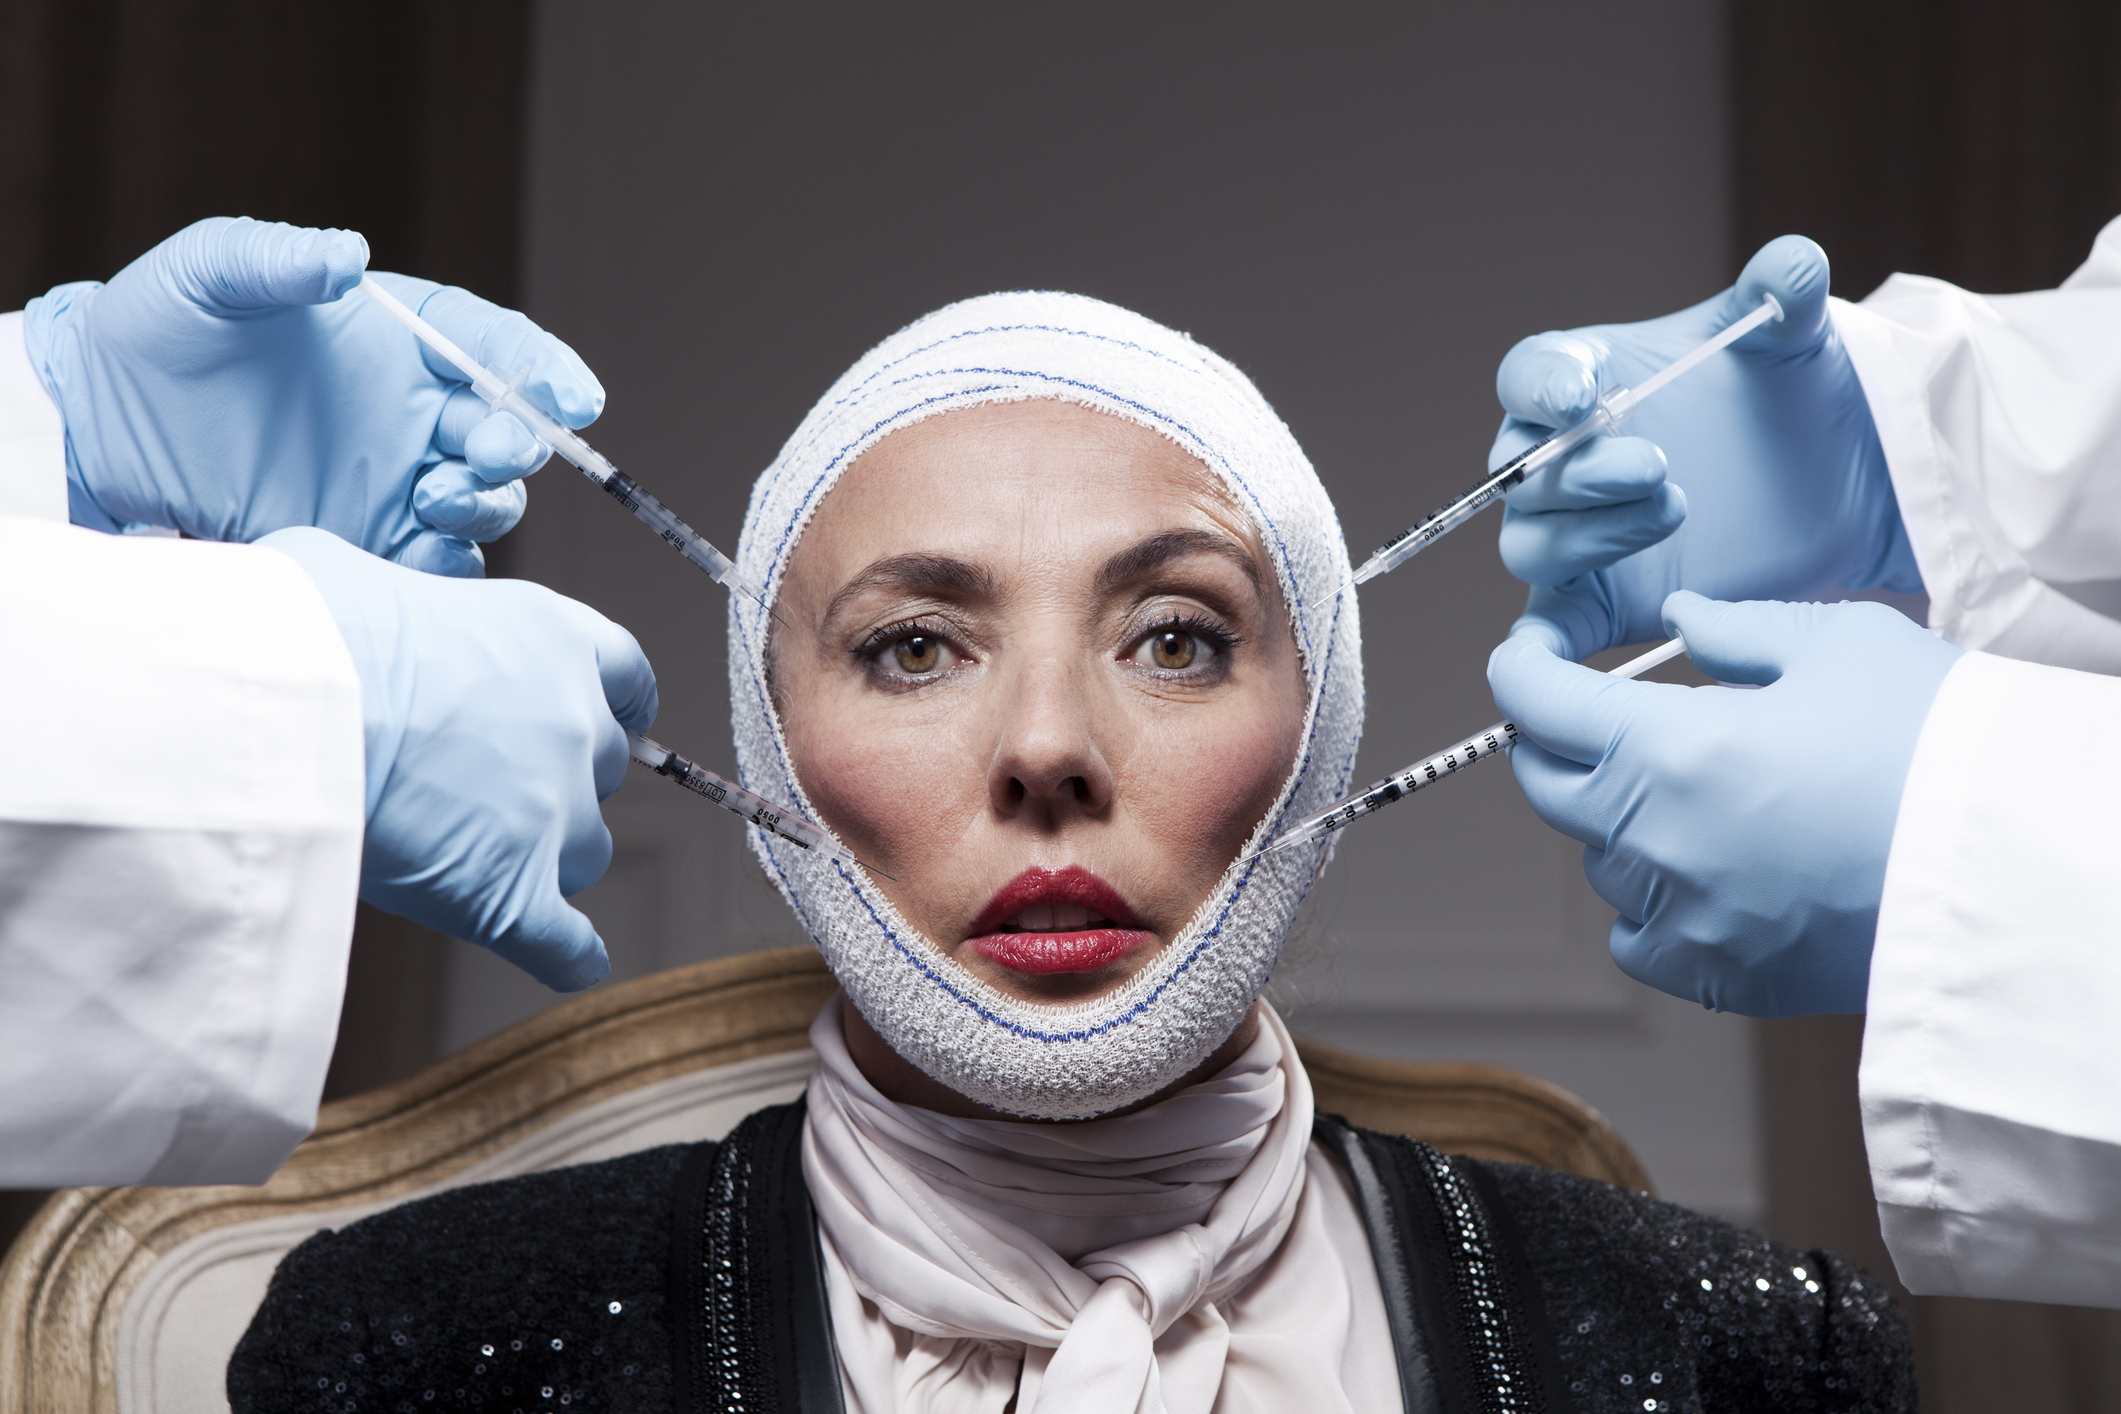 Woman with bandaged head surrounded by hands with medical tools, post-cosmetic procedure look